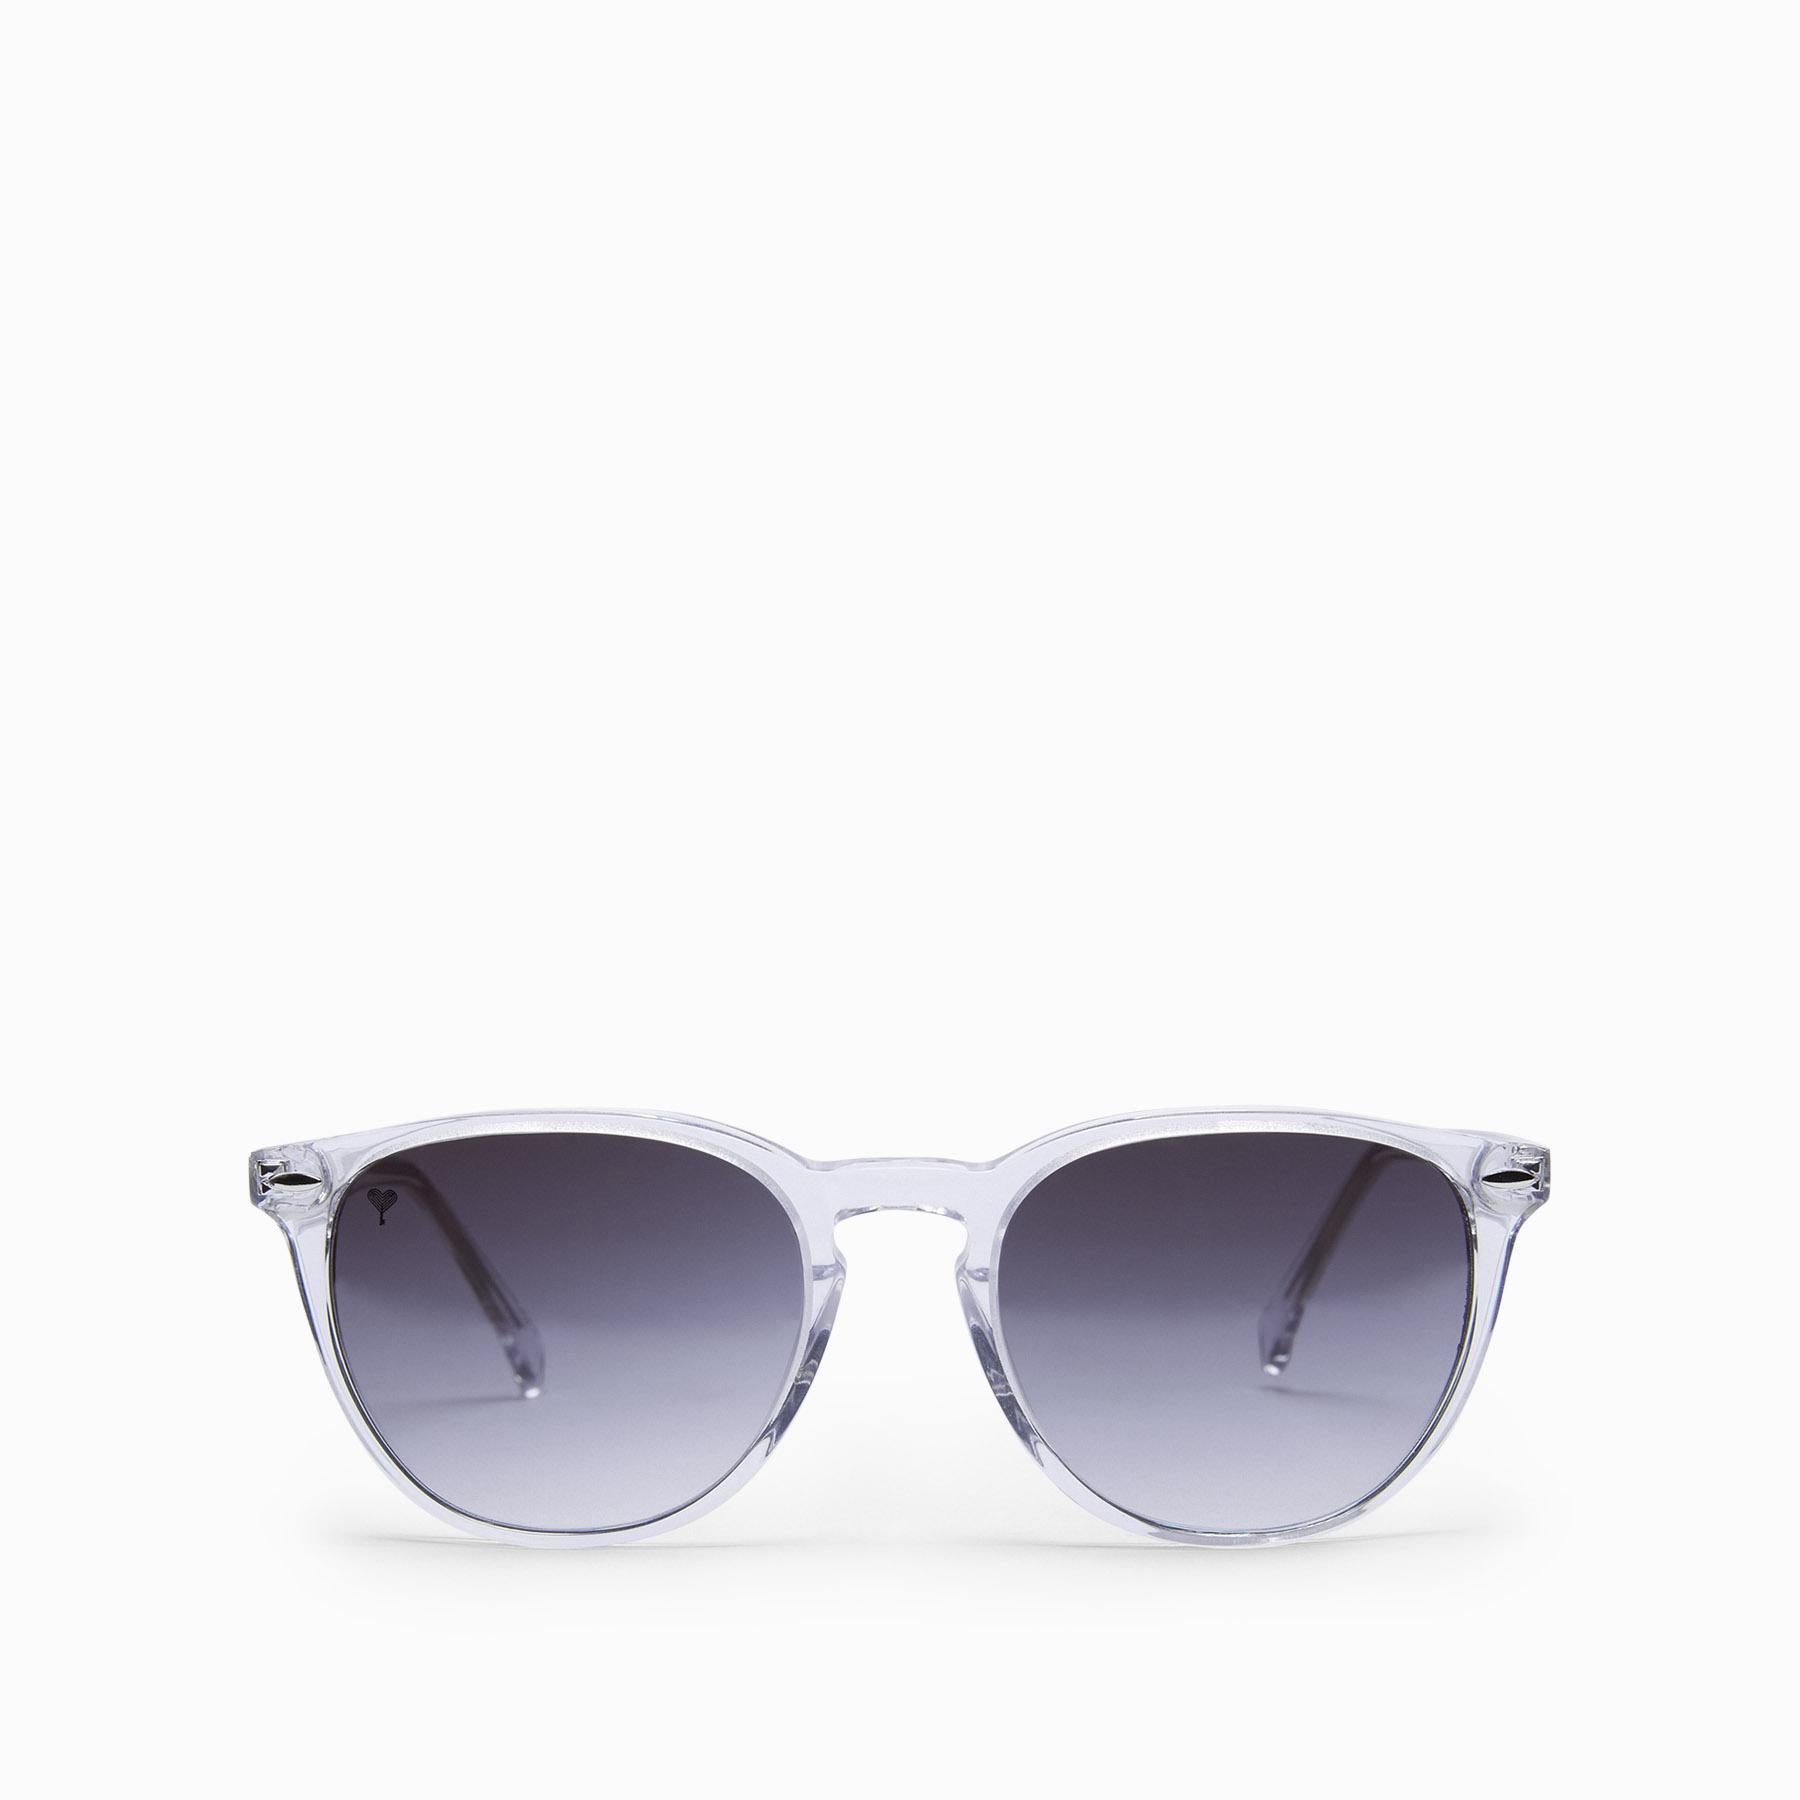 Clear Round Sunglasses